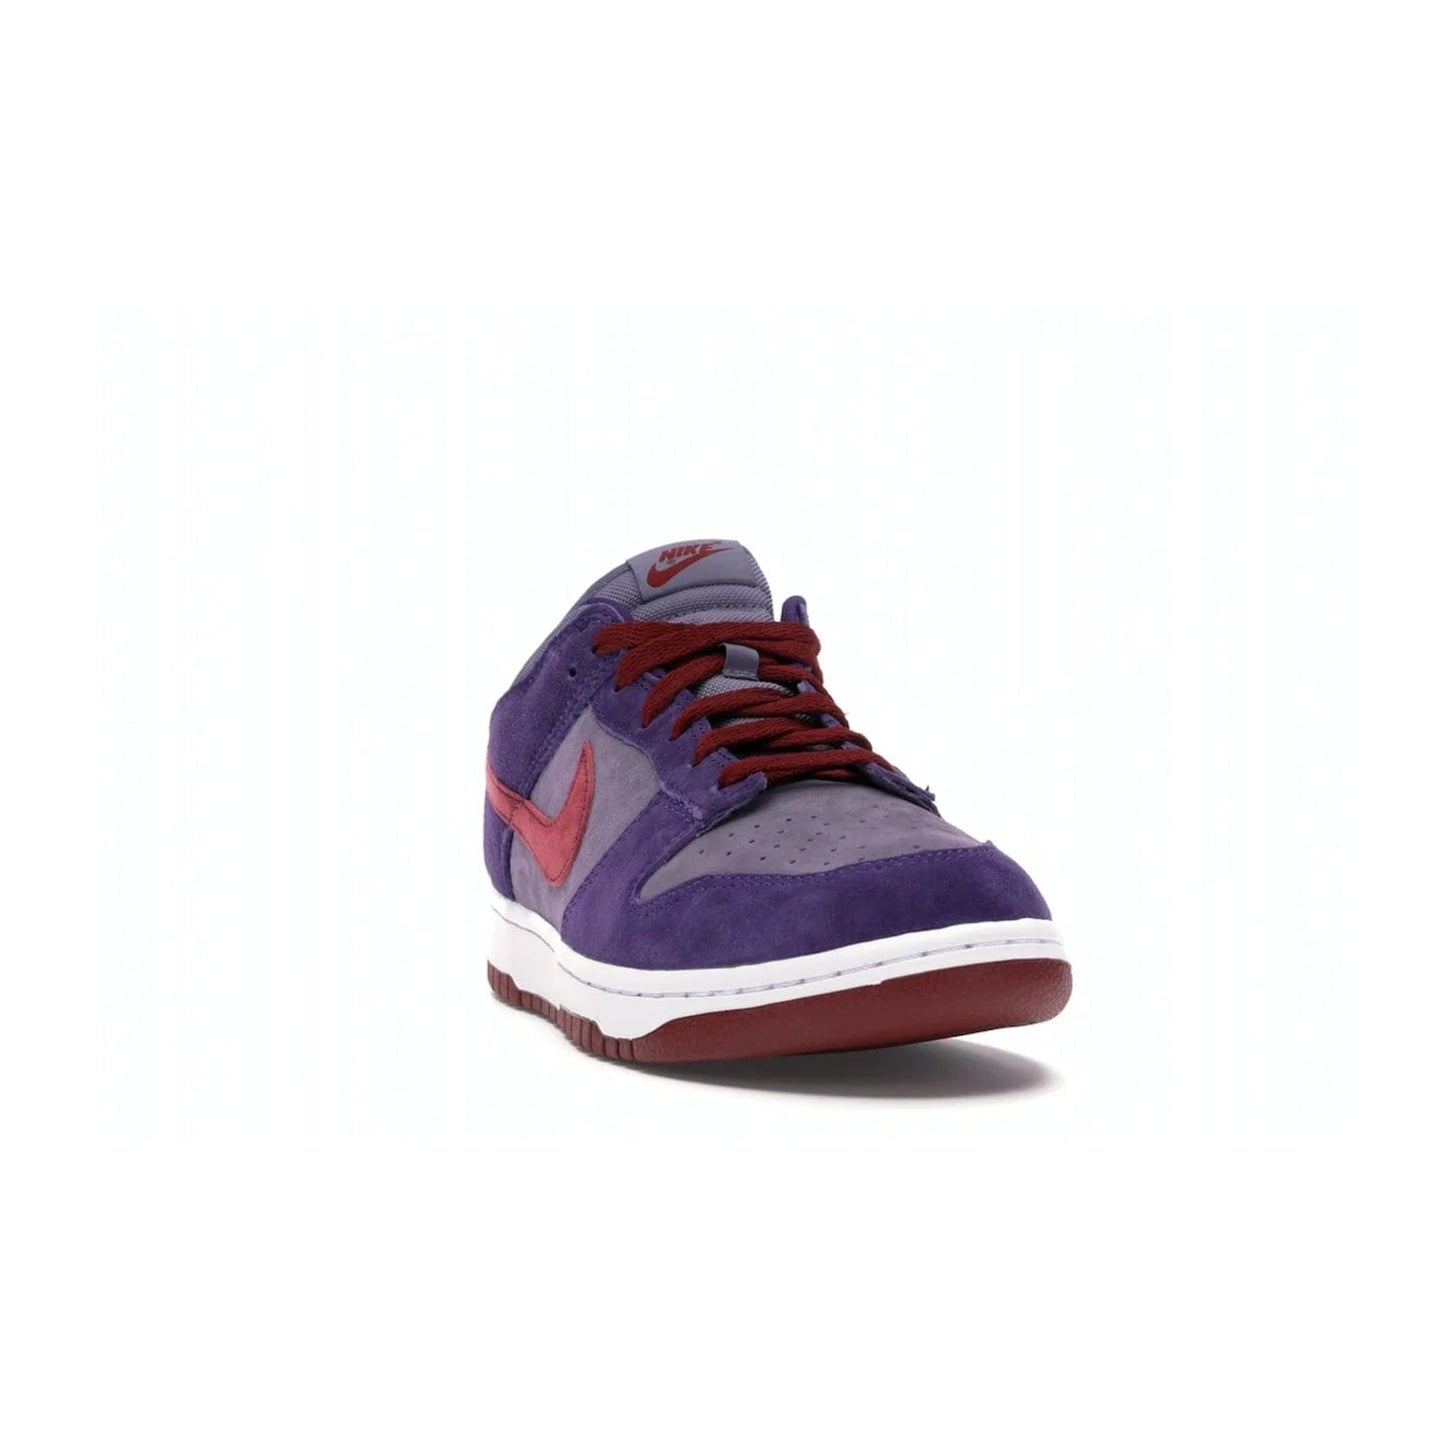 Nike Dunk Low Plum (2020) - Image 8 - Only at www.BallersClubKickz.com - Elevate your look with the Nike Dunk Low Plum (2020). Featuring a bold purple colorway, this retro-inspired silhouette is constructed of premium suede and makes for a must-have for any sneakerhead.